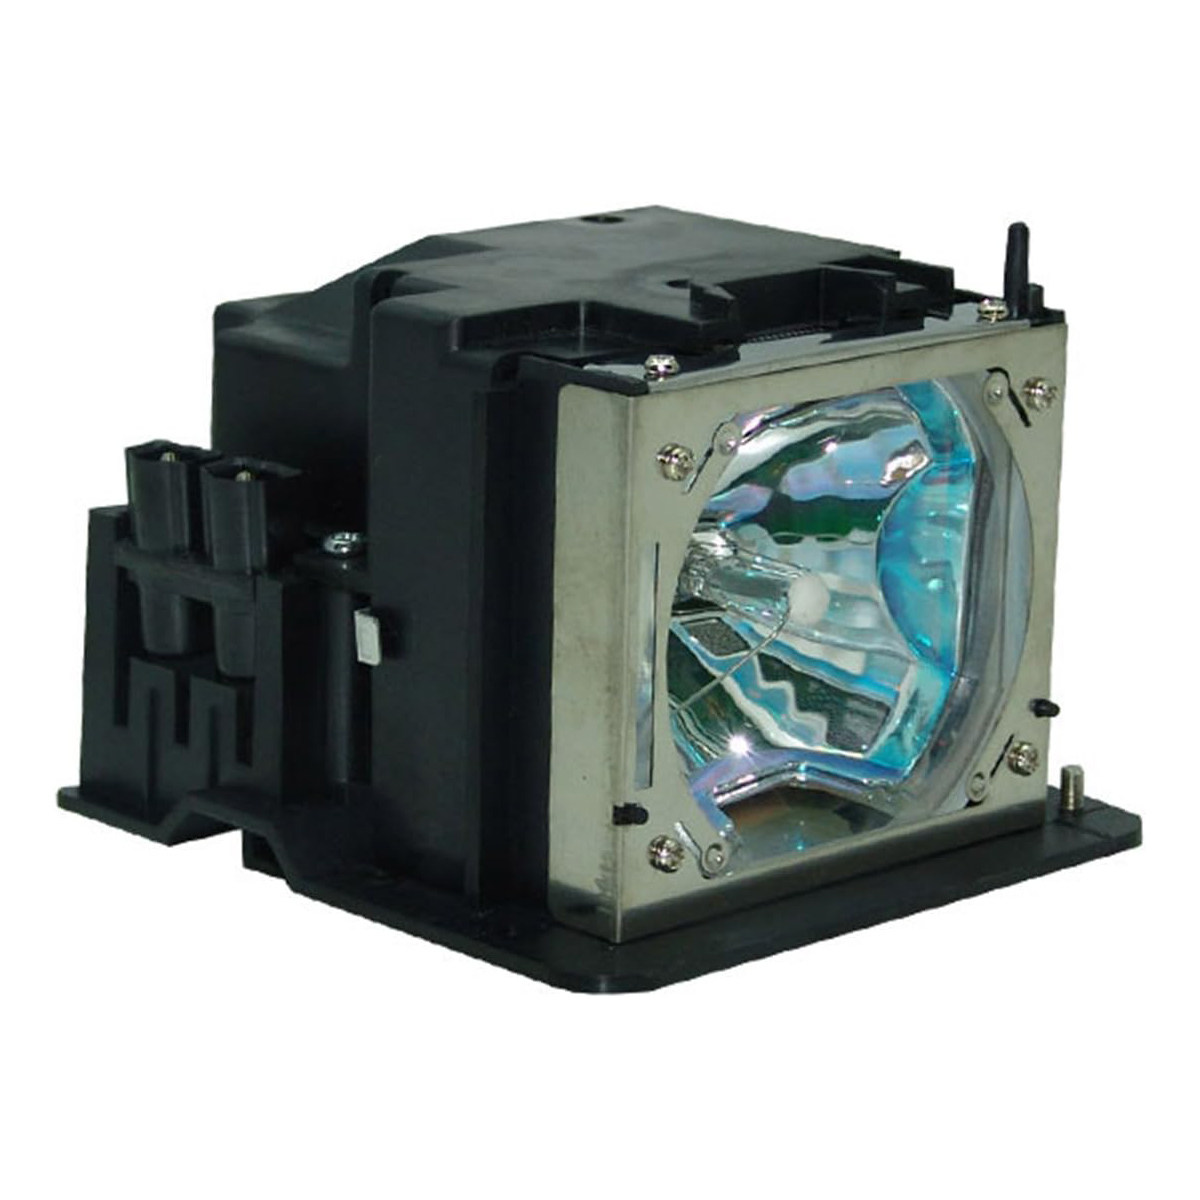 Replacement Projector lamp 456-8766 For Dukane Projector